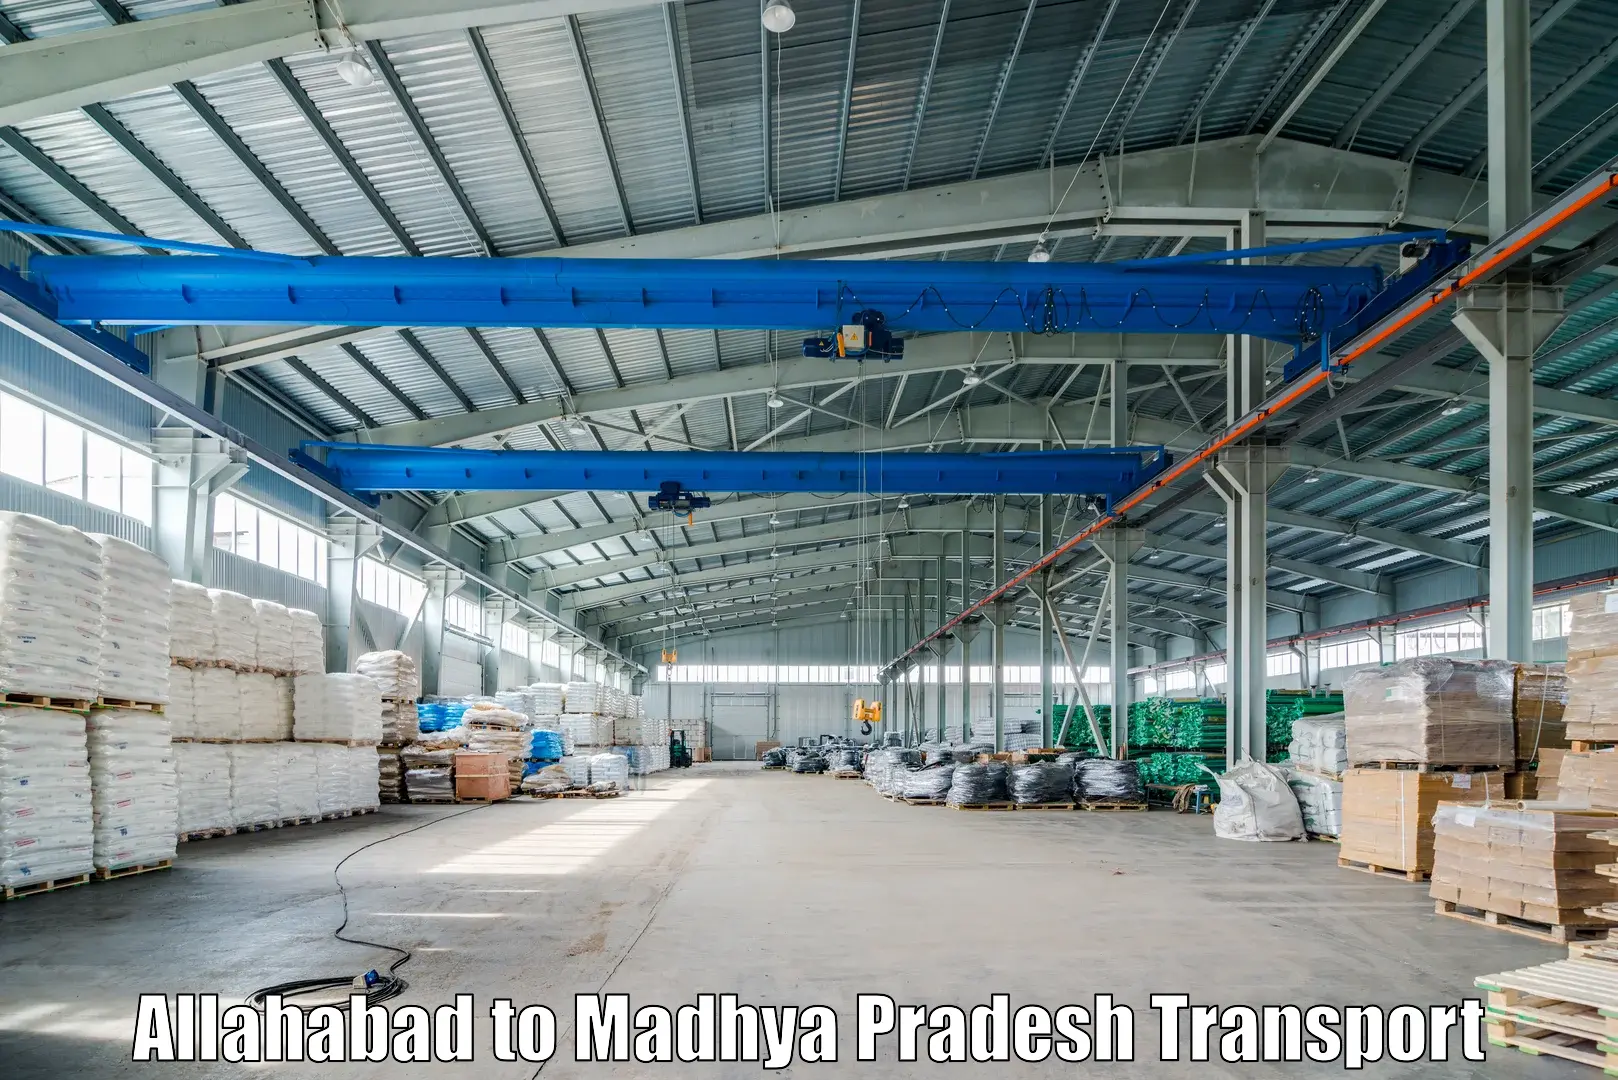 Road transport online services in Allahabad to Gwalior